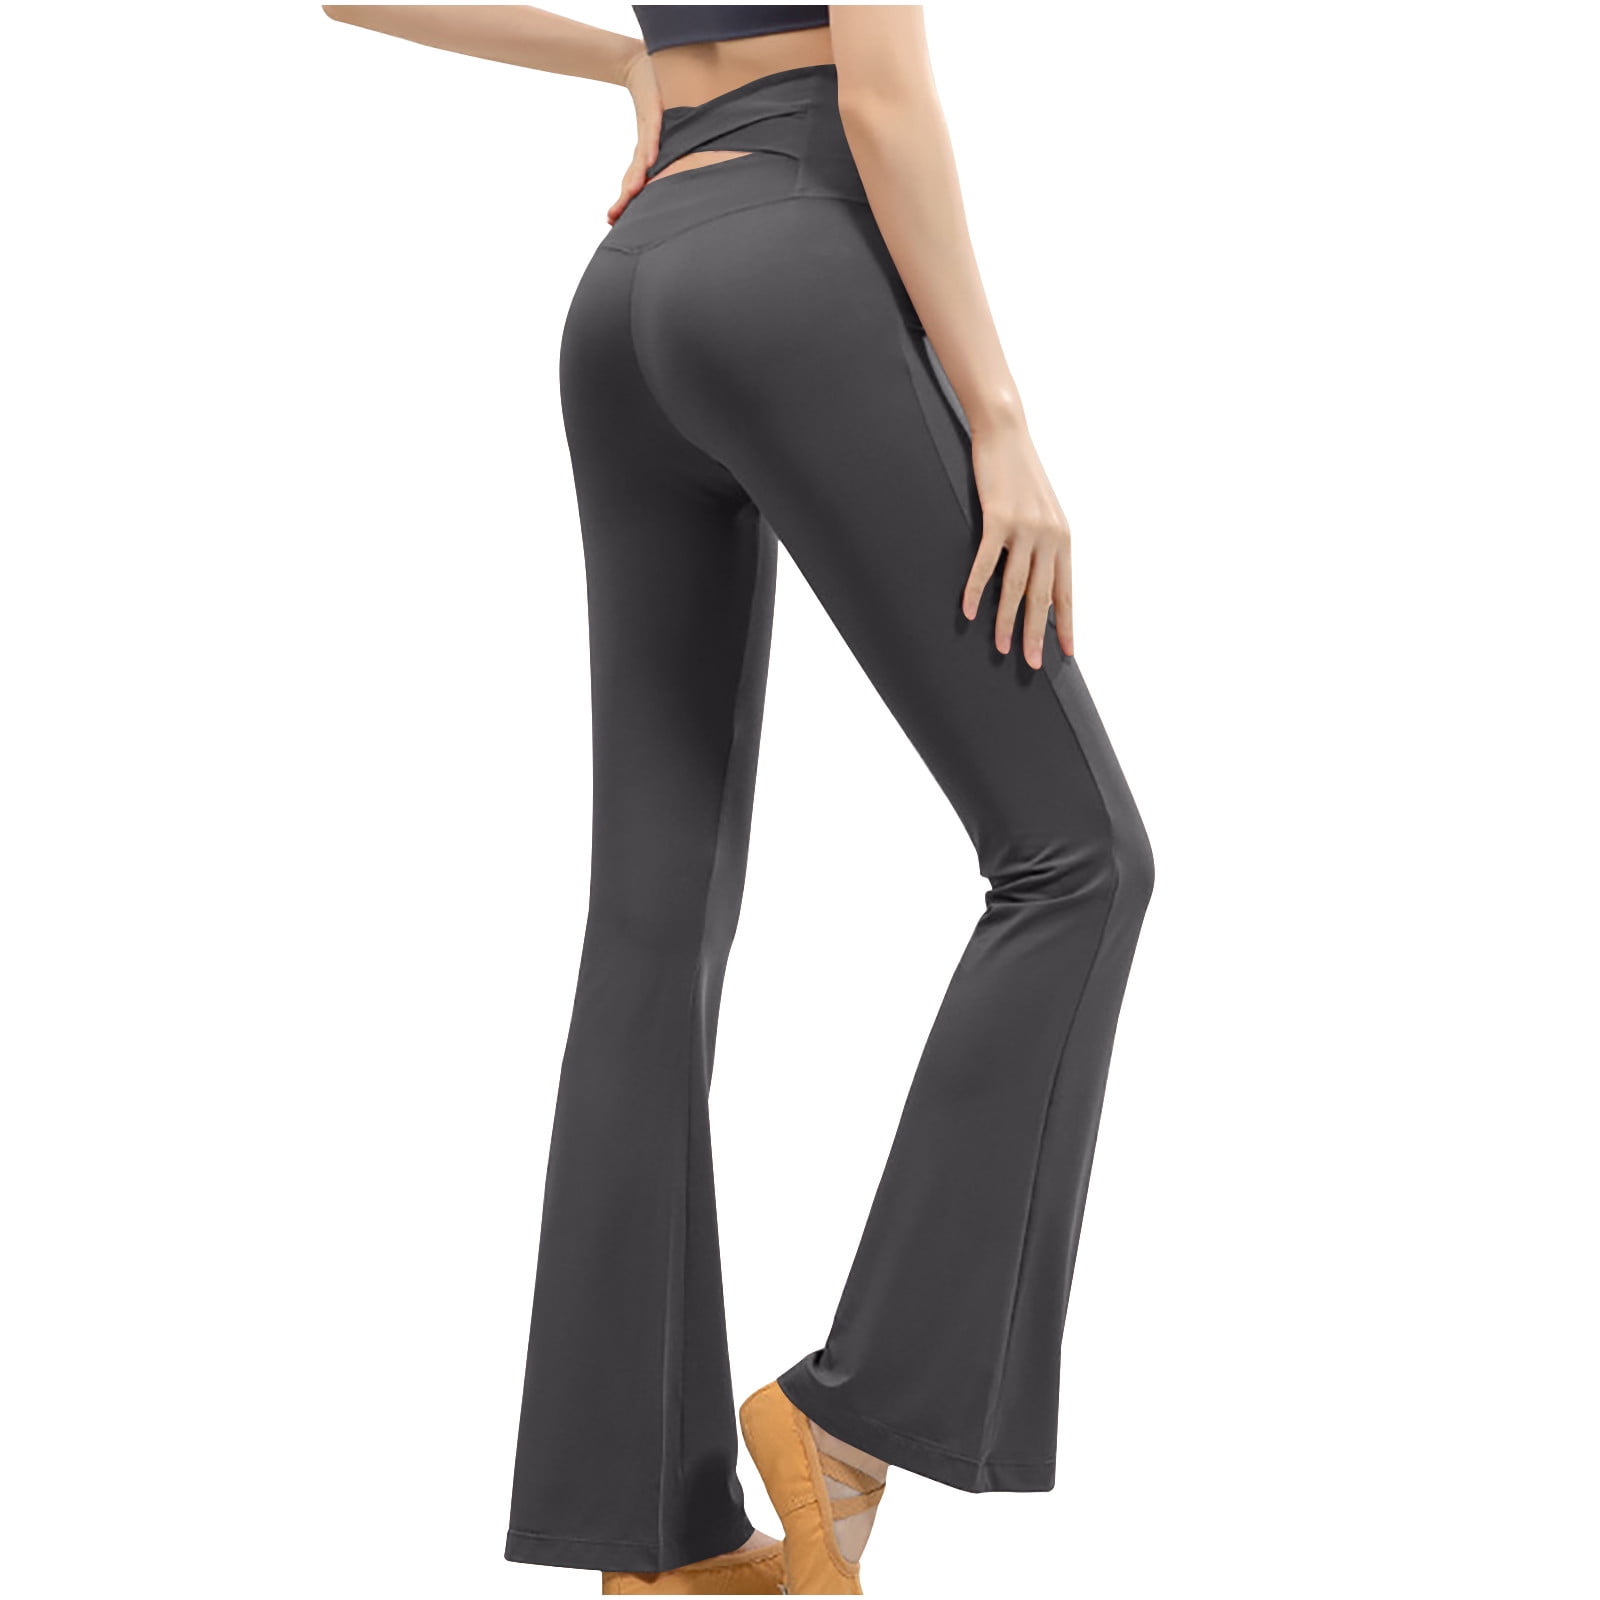 High Waist Bootcut Slimming Bootcut Yoga Pants For Women Flare Leg, Tummy  Control, 4 Way Stretch, Quick Dry, Dark Grey Wine Ion Perfect For Fitness,  Gym, And Workouts Style #5589497 From Wmgb